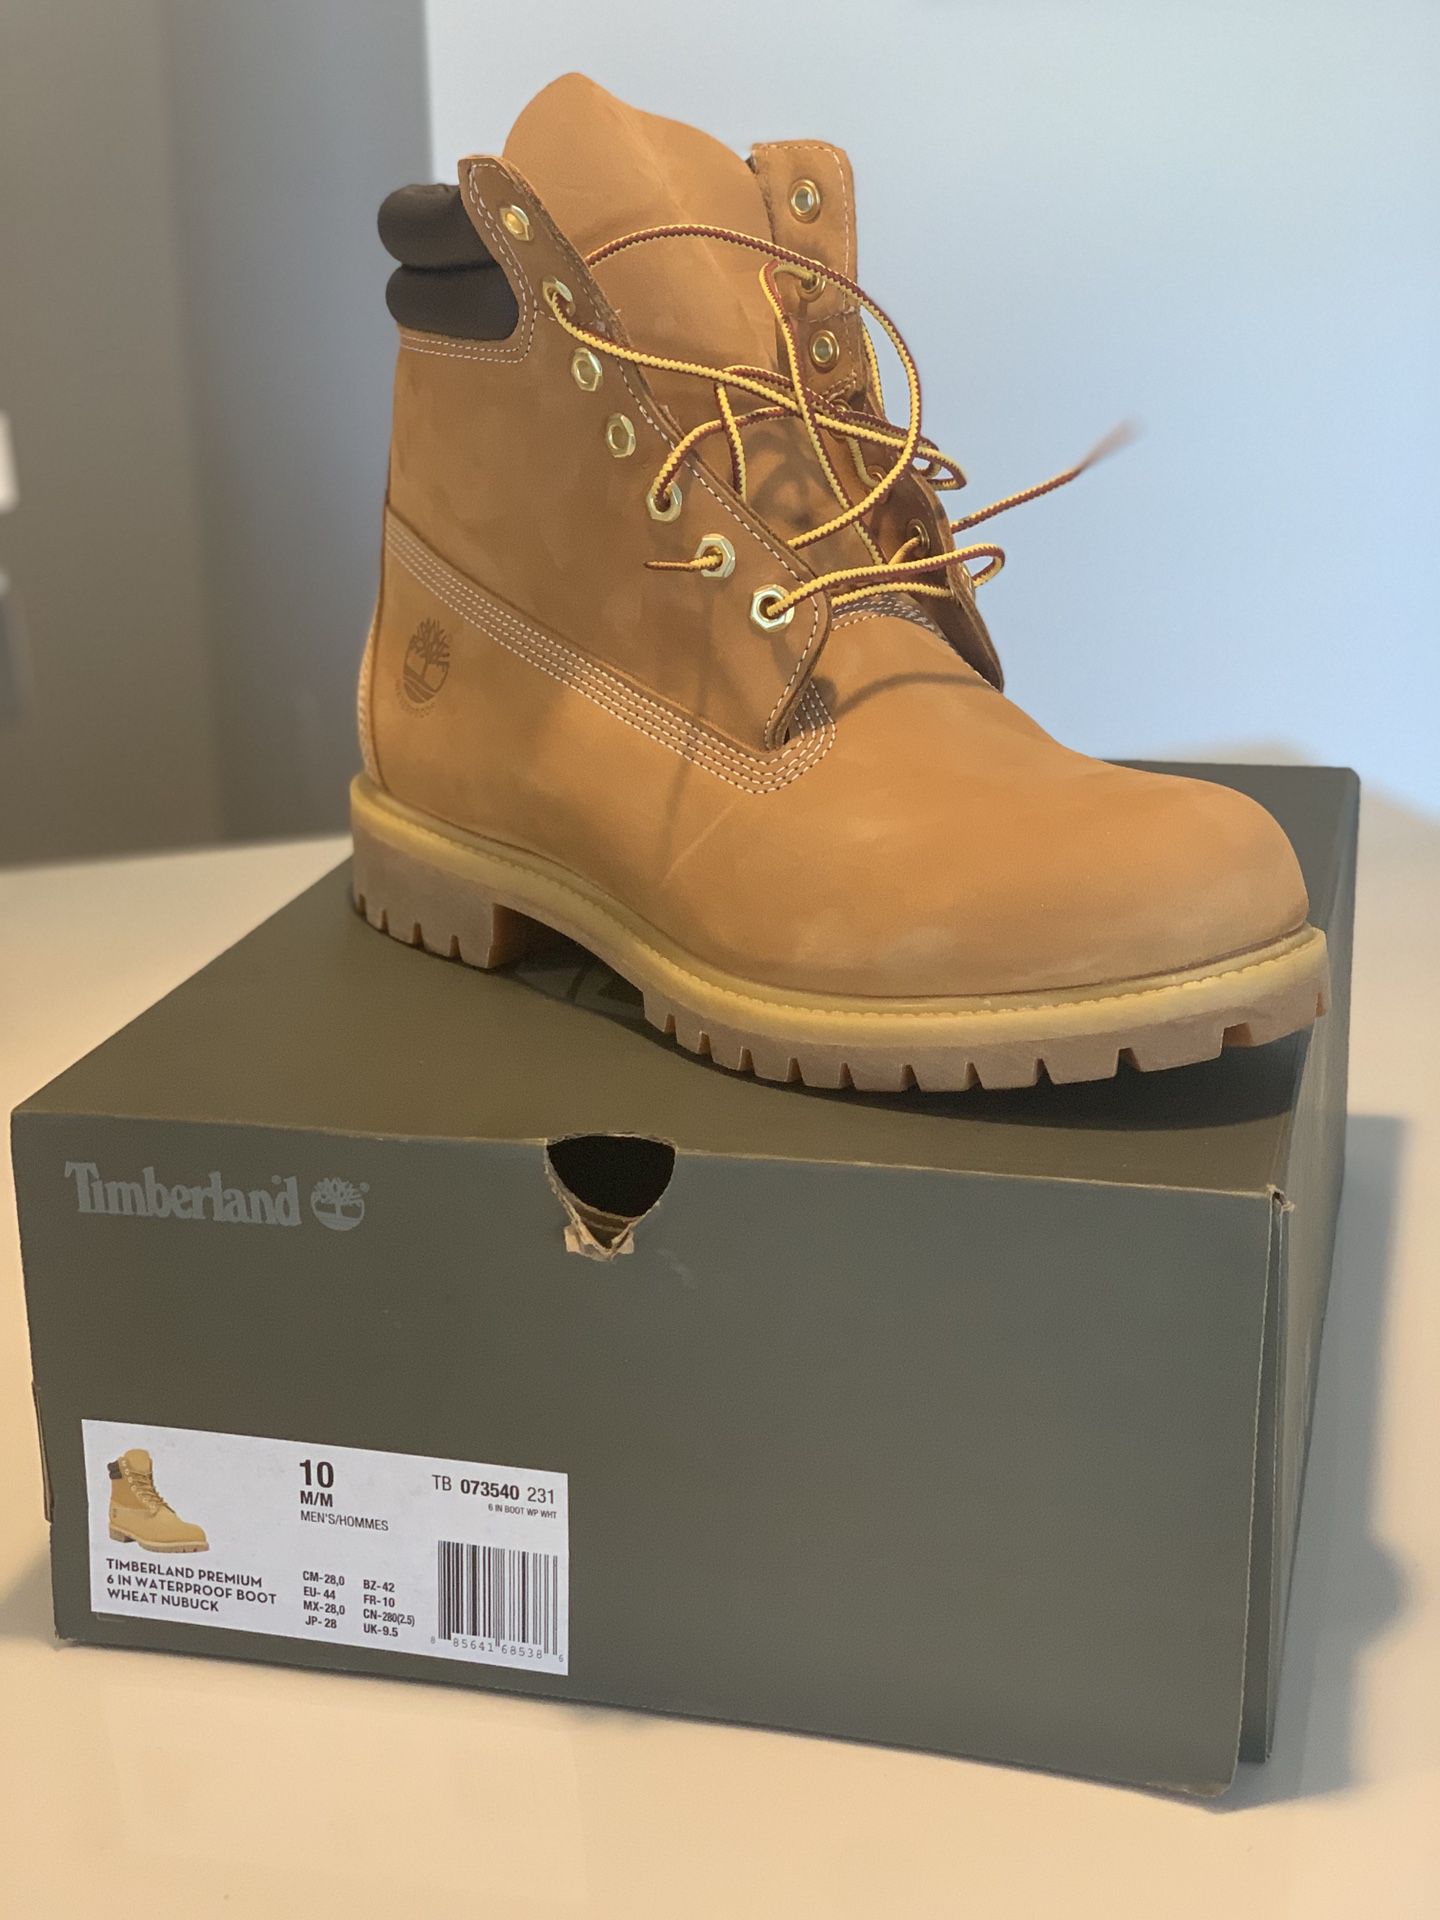 Timberland 6” Mens Boots Size 10